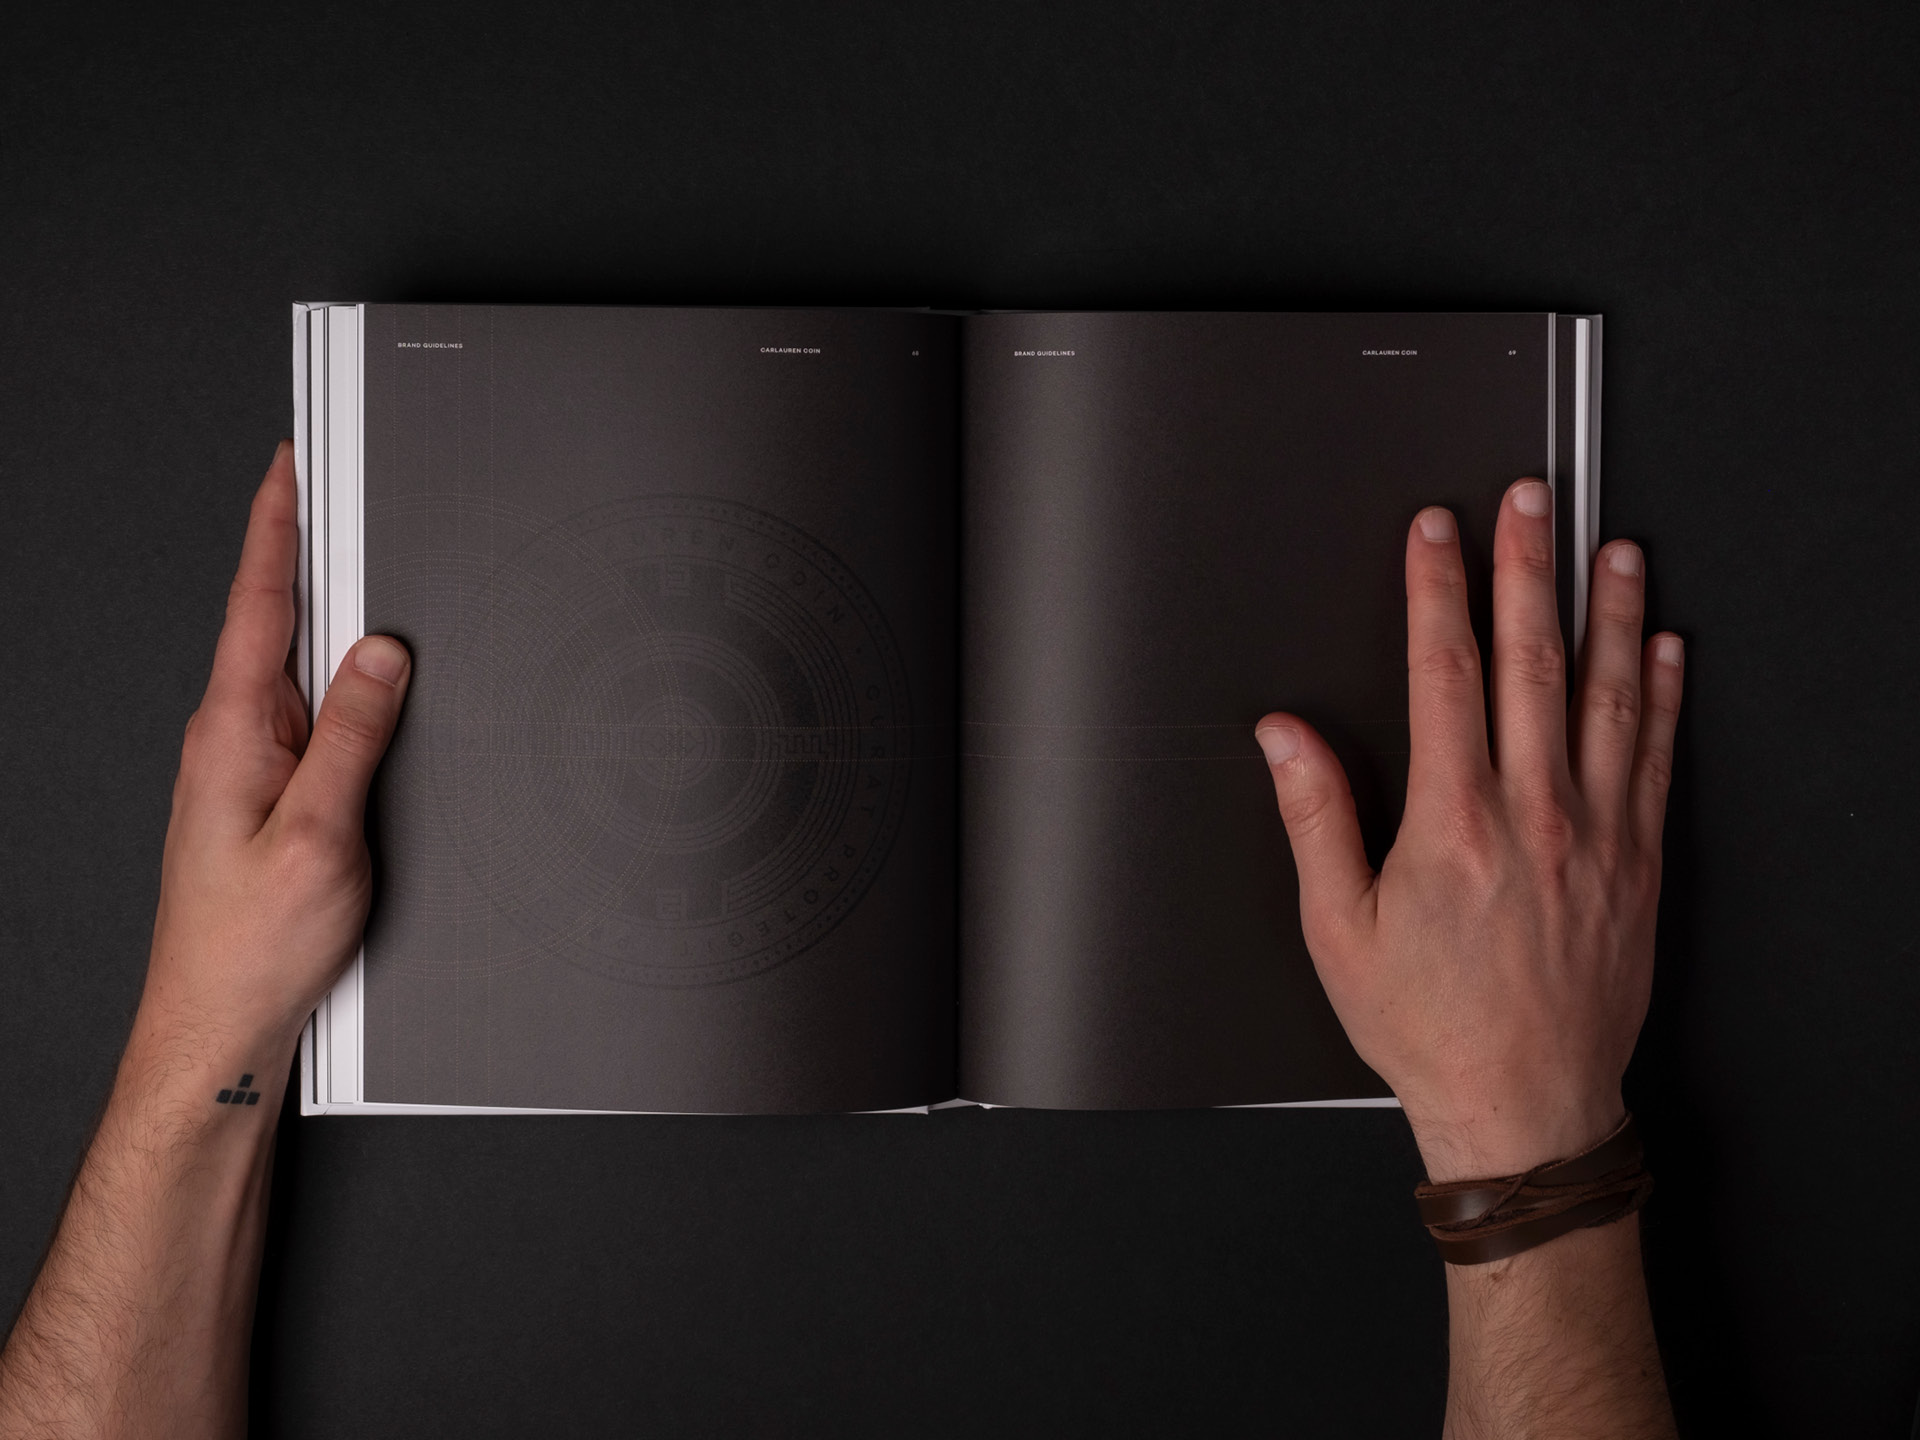 A printed spread from the Carlauren guidelines showing the detail of the Carlauren coin